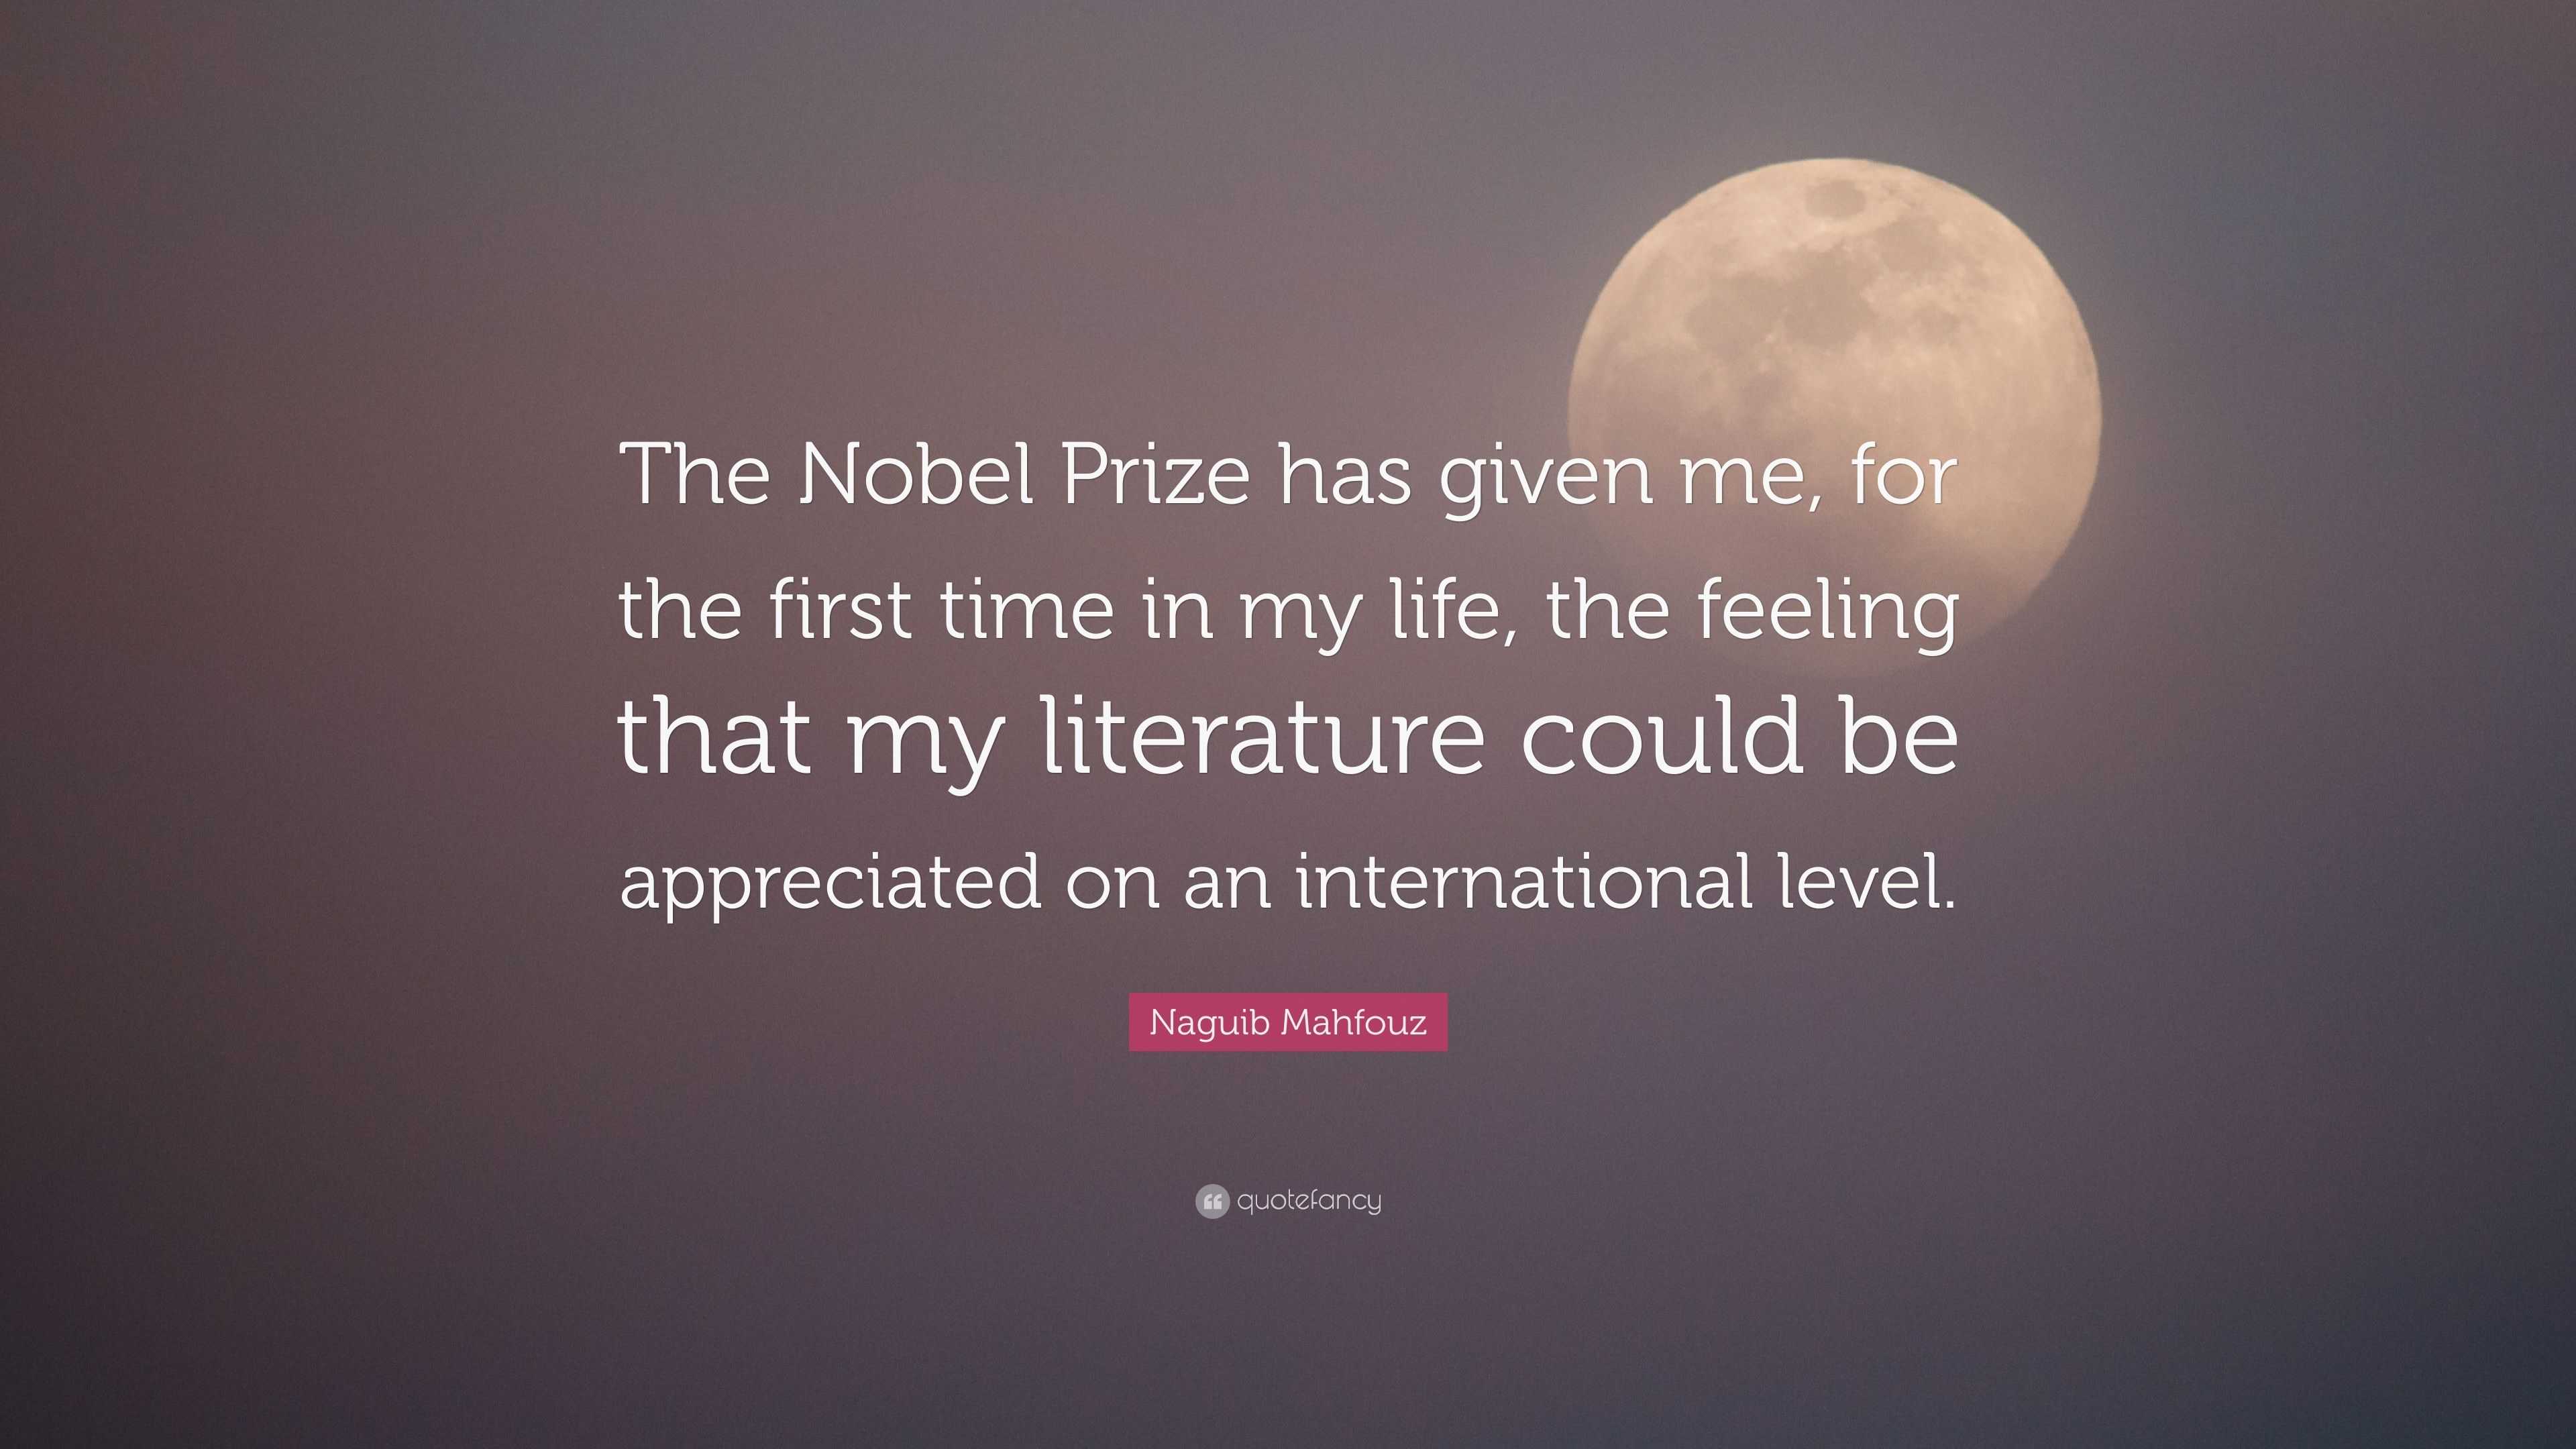 Naguib Mahfouz Quote: "The Nobel Prize has given me, for ...